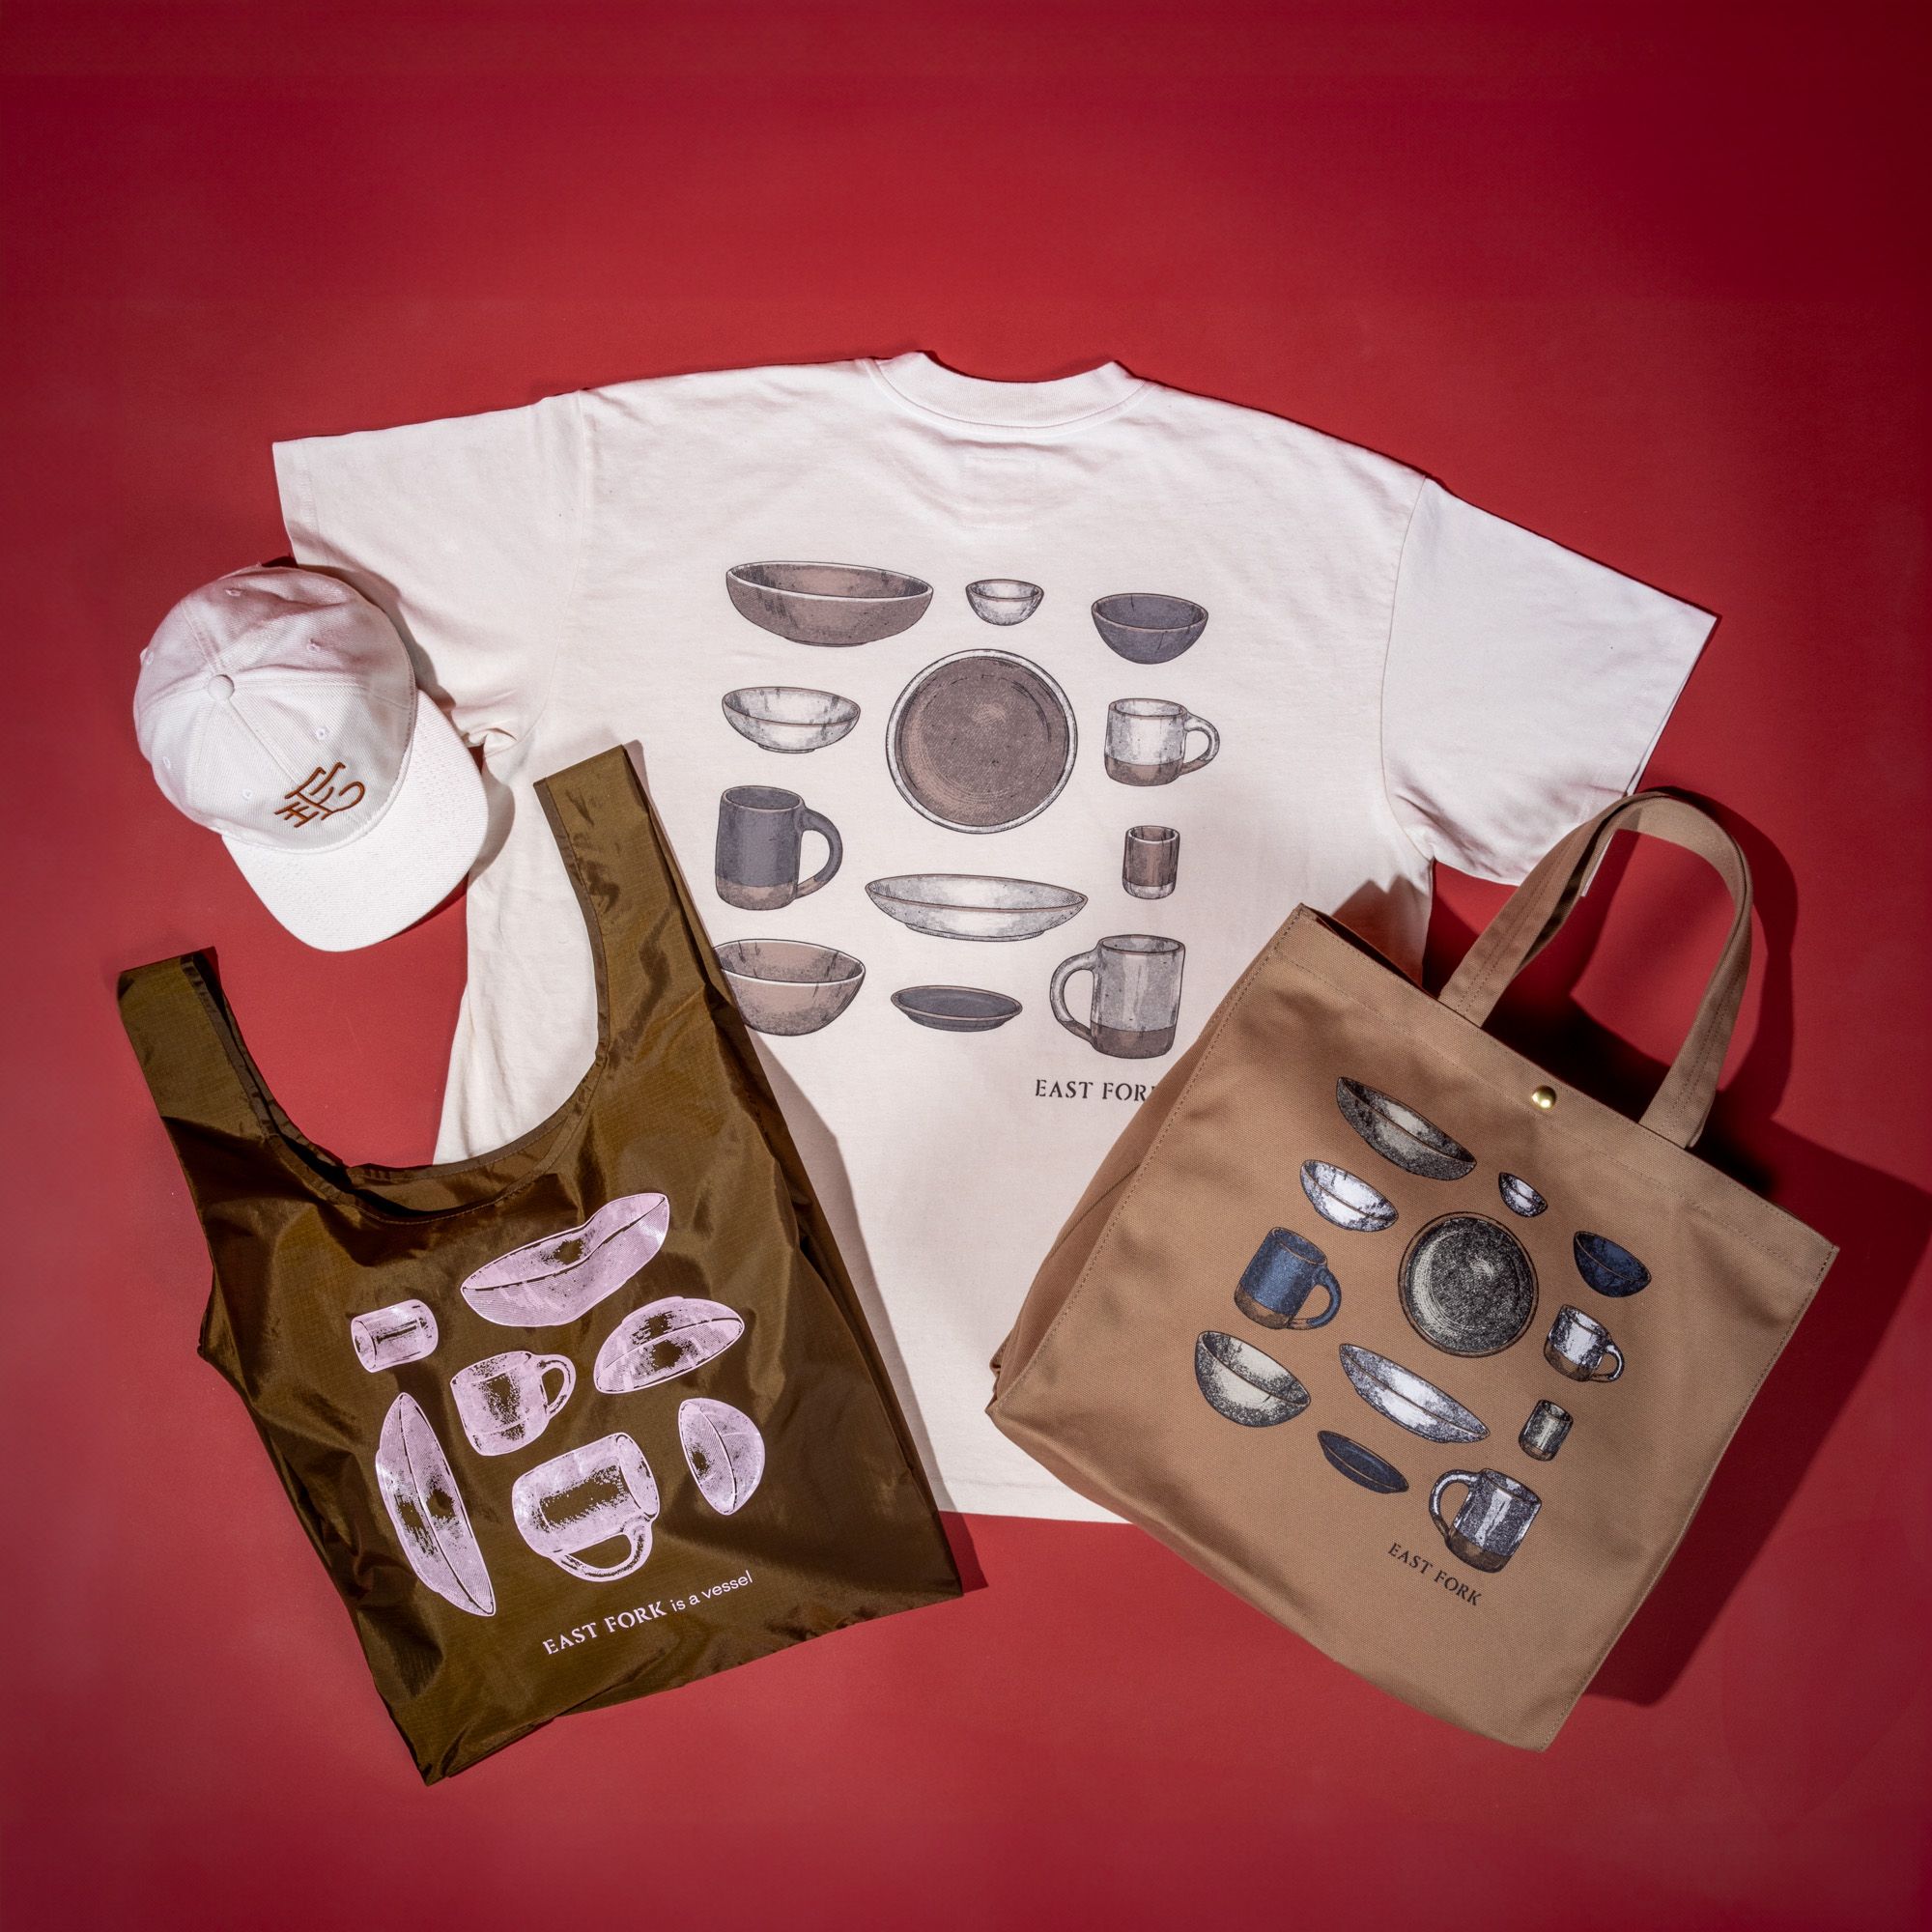 Overhead view of an East Fork tee with ceramic mugs, plates, and mug illustration, with a tote bag, a nylon bag, and a baseball hat - all against a red background.